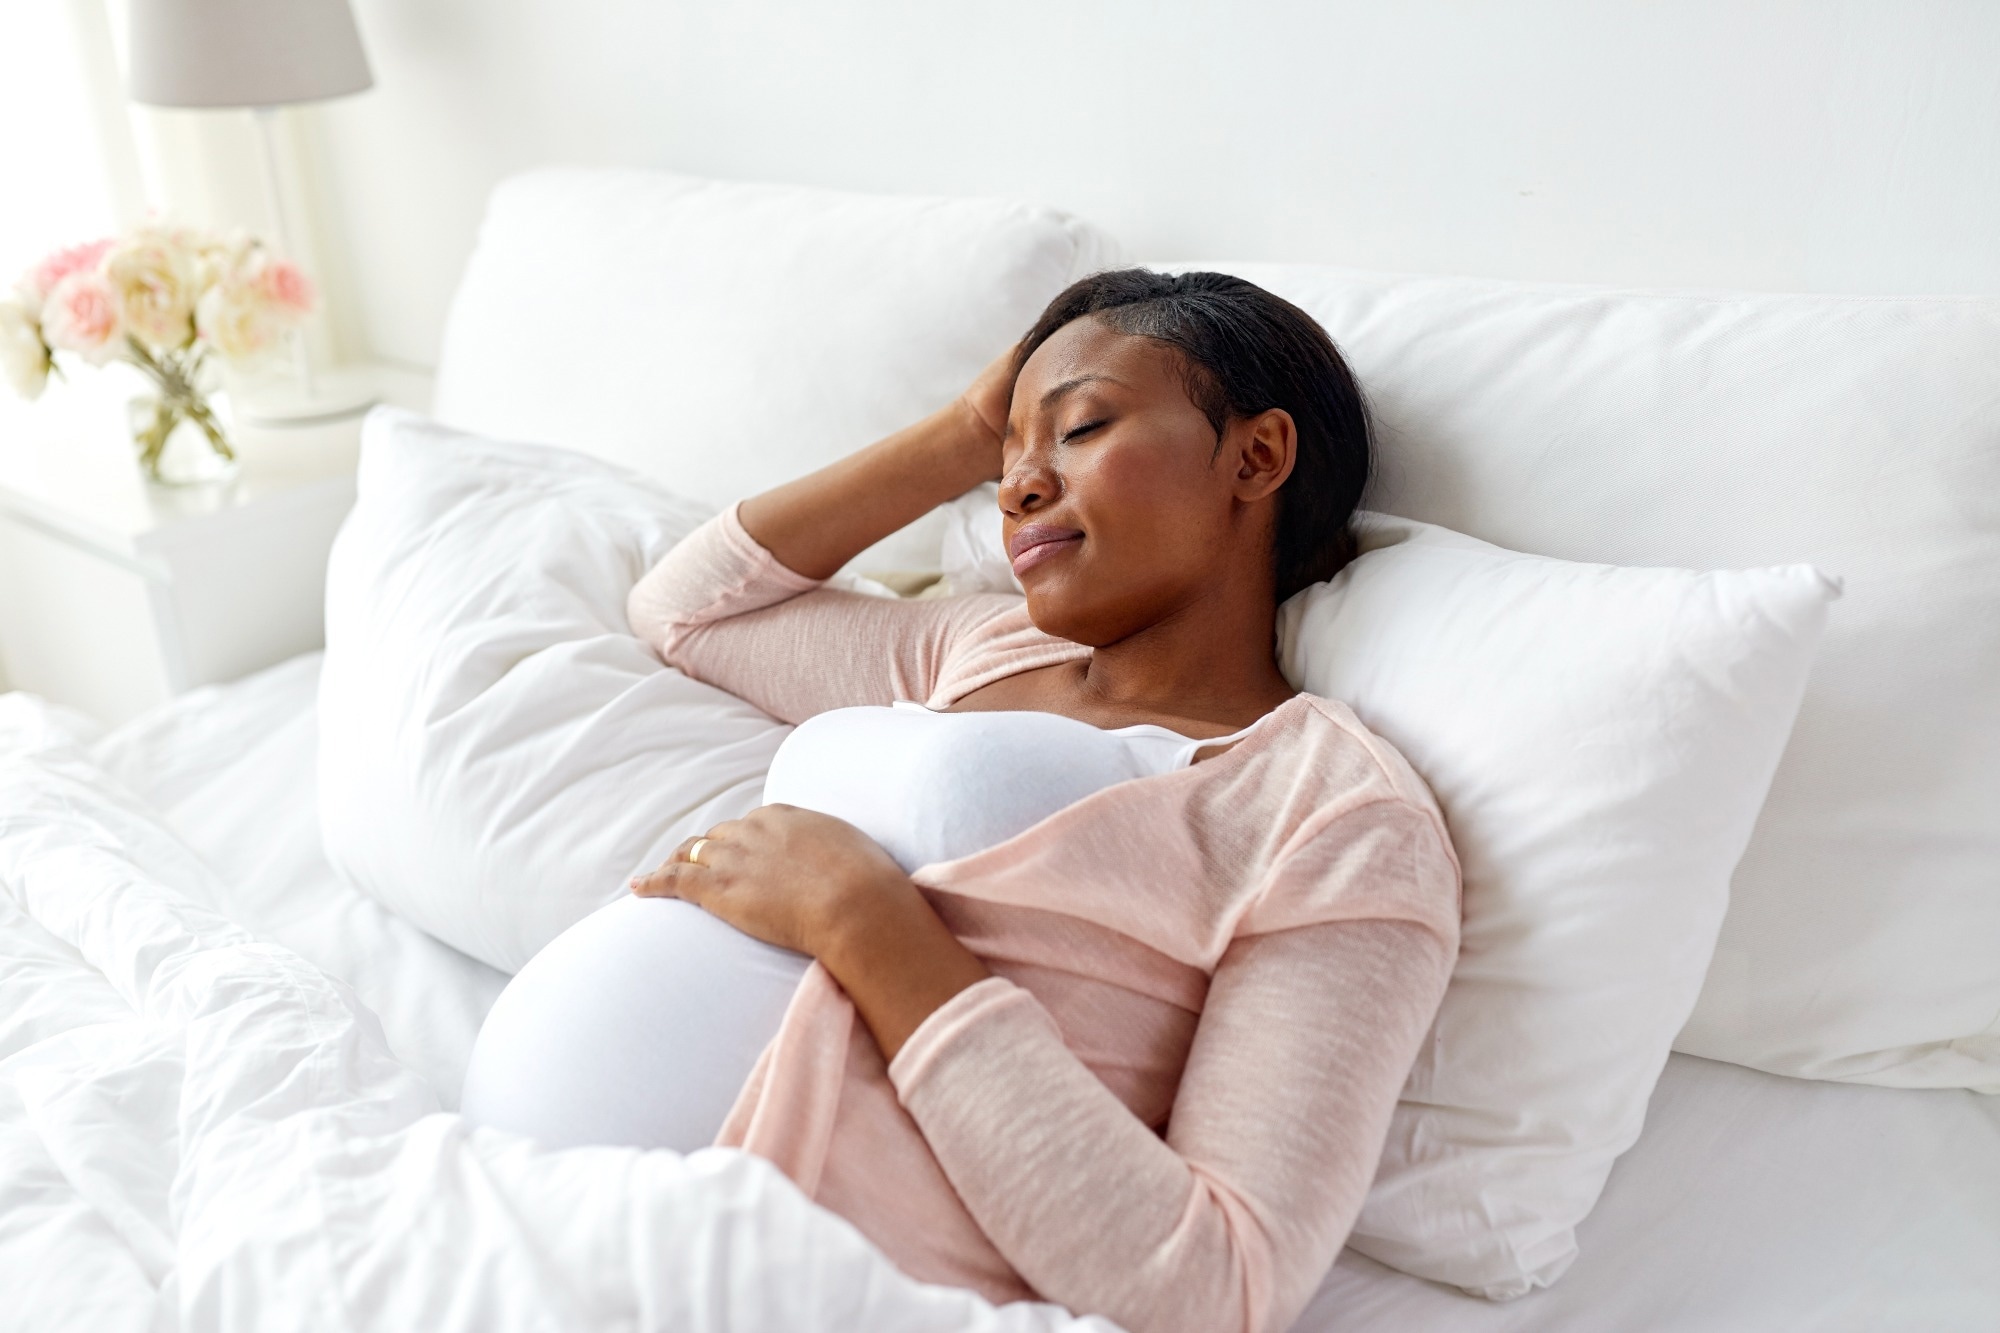 Common sleep disorders in pregnancy: a review